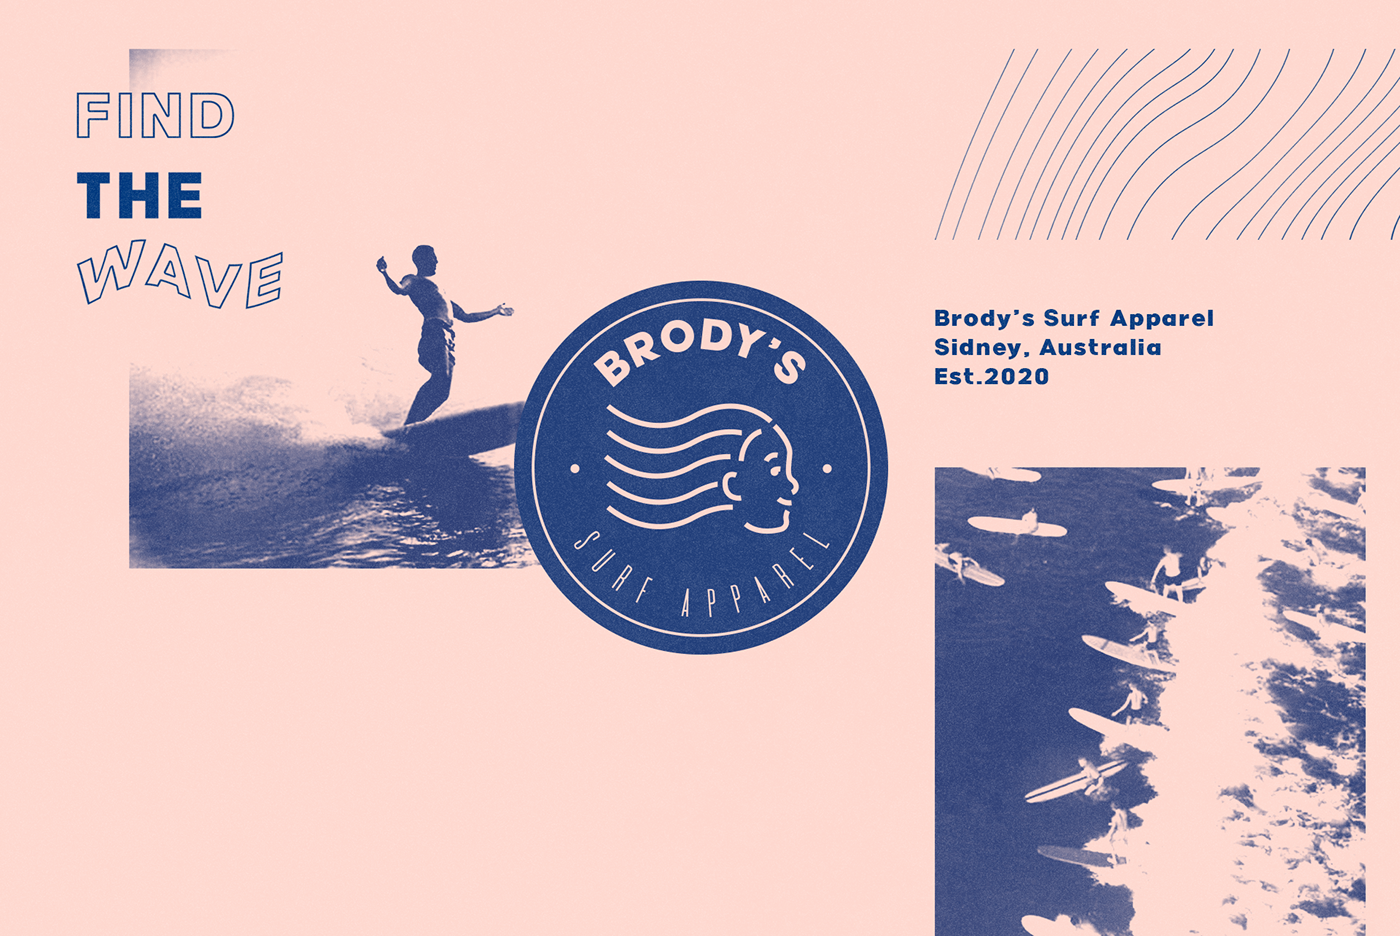 Graphic Design and Branding project for a Concept Surf Brand called Brody’s Surf Apparel.